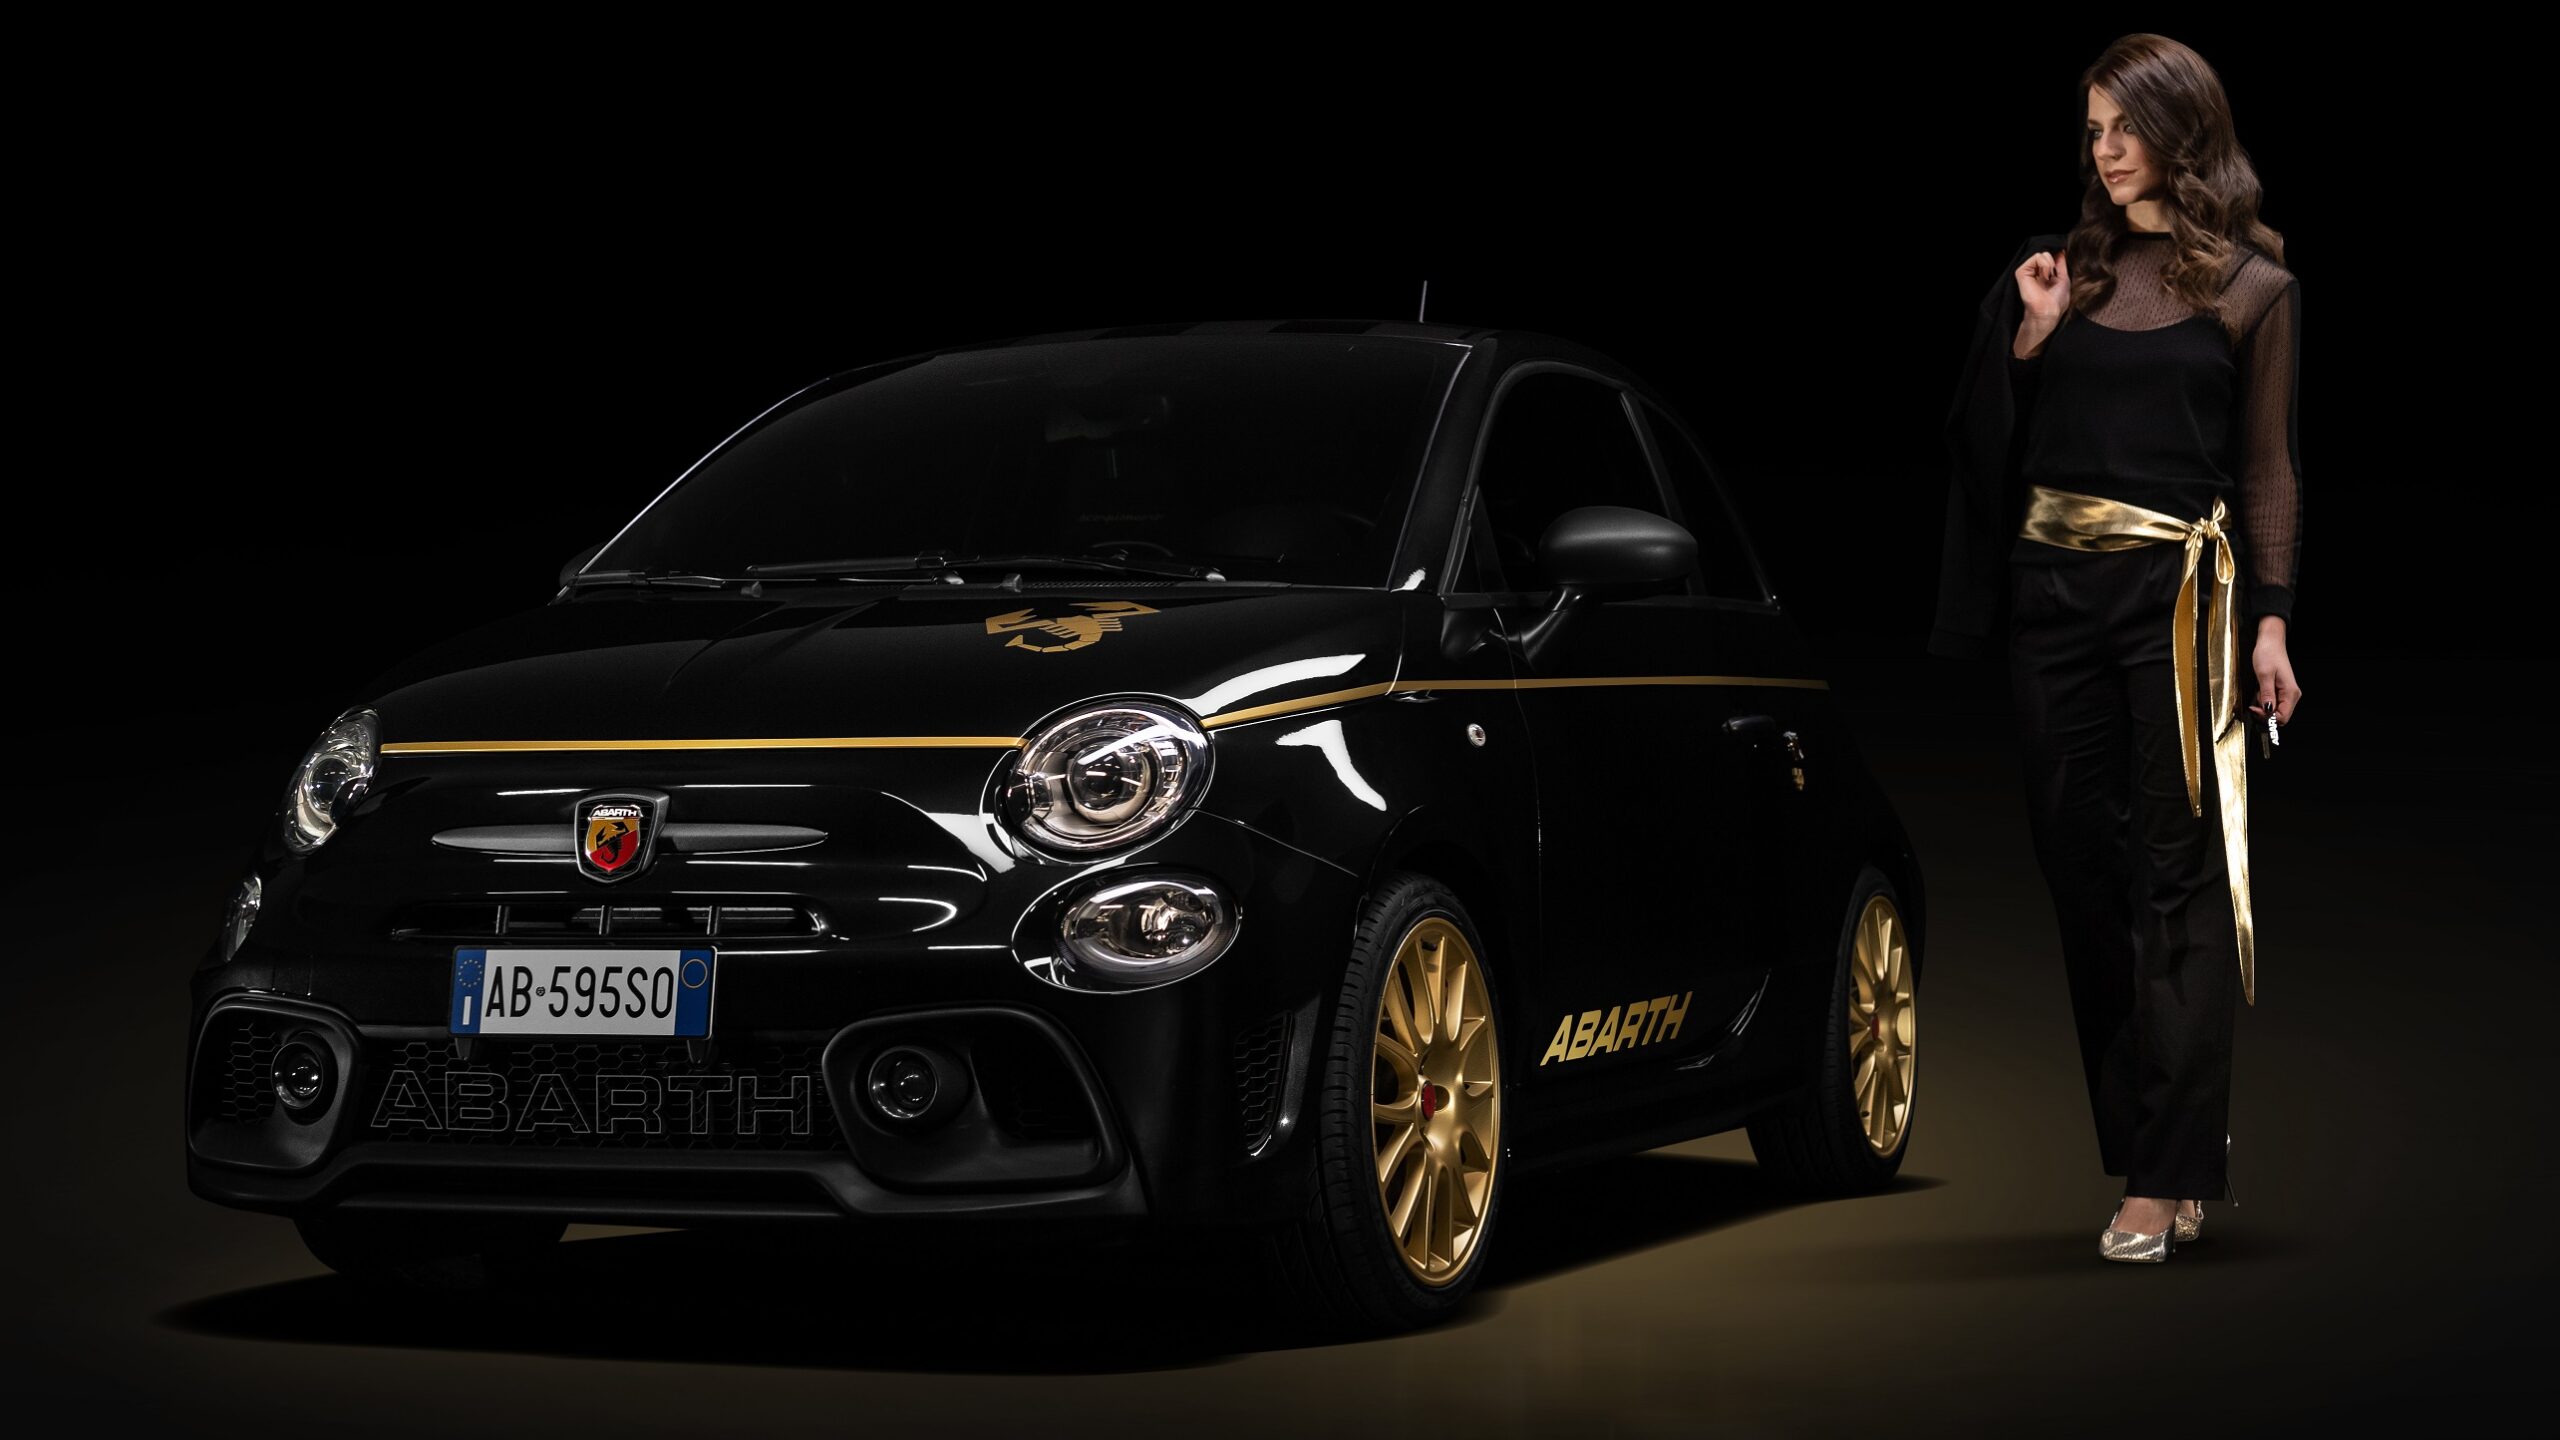 Abarth 595 Reminds Us It's Still Around With New Limited Edition For Japan